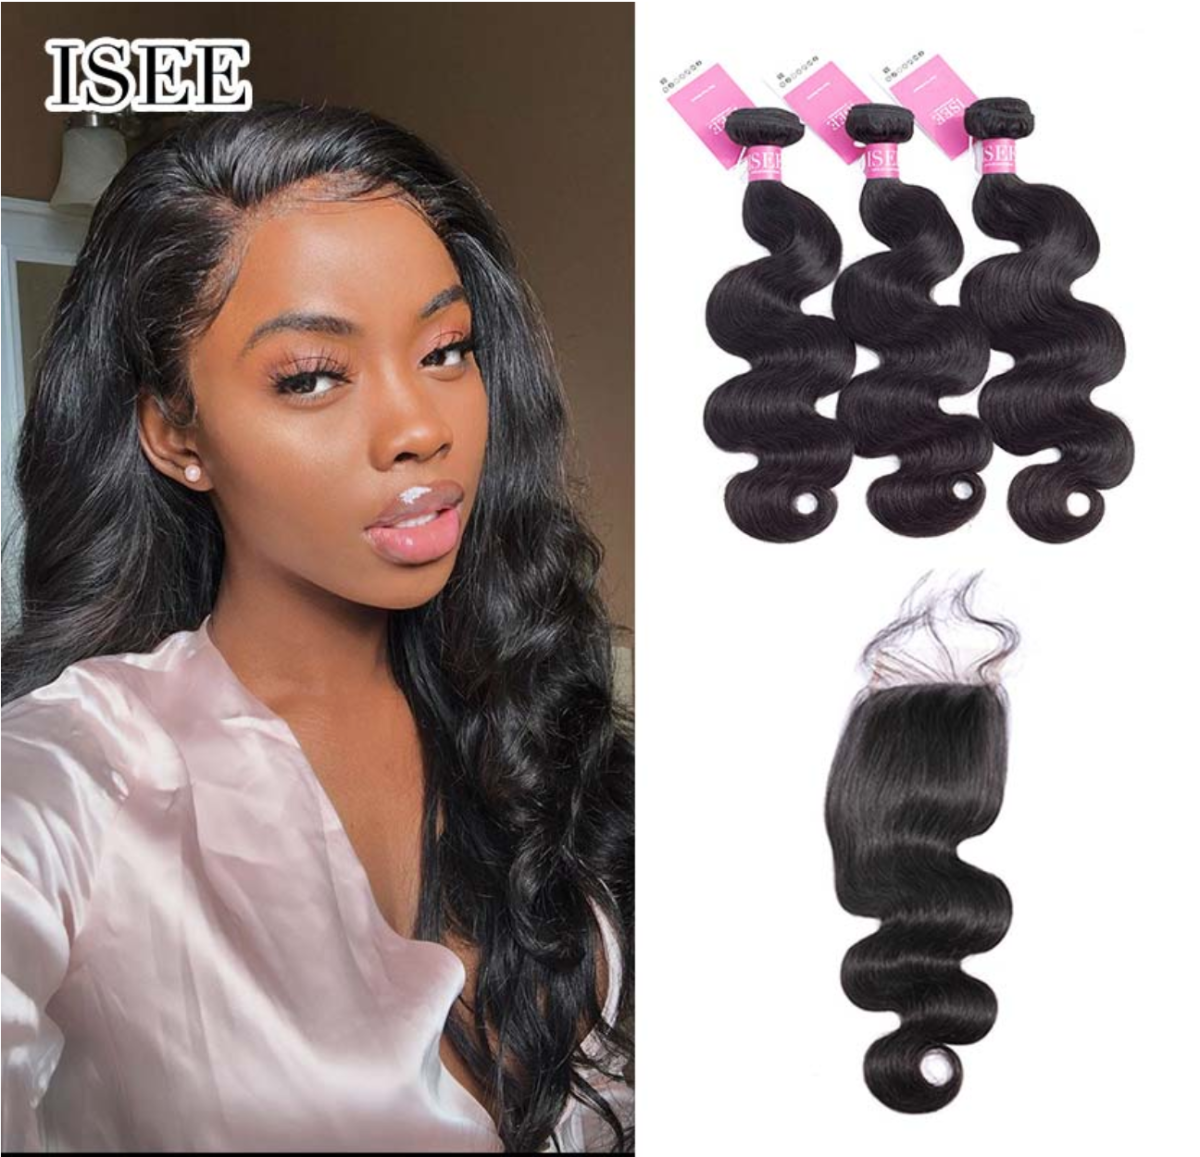 Isee+Hair%3A+Reveal+The+Beauty+Of+Your+Hair+Bundles+%26+Enhance+Your+Style